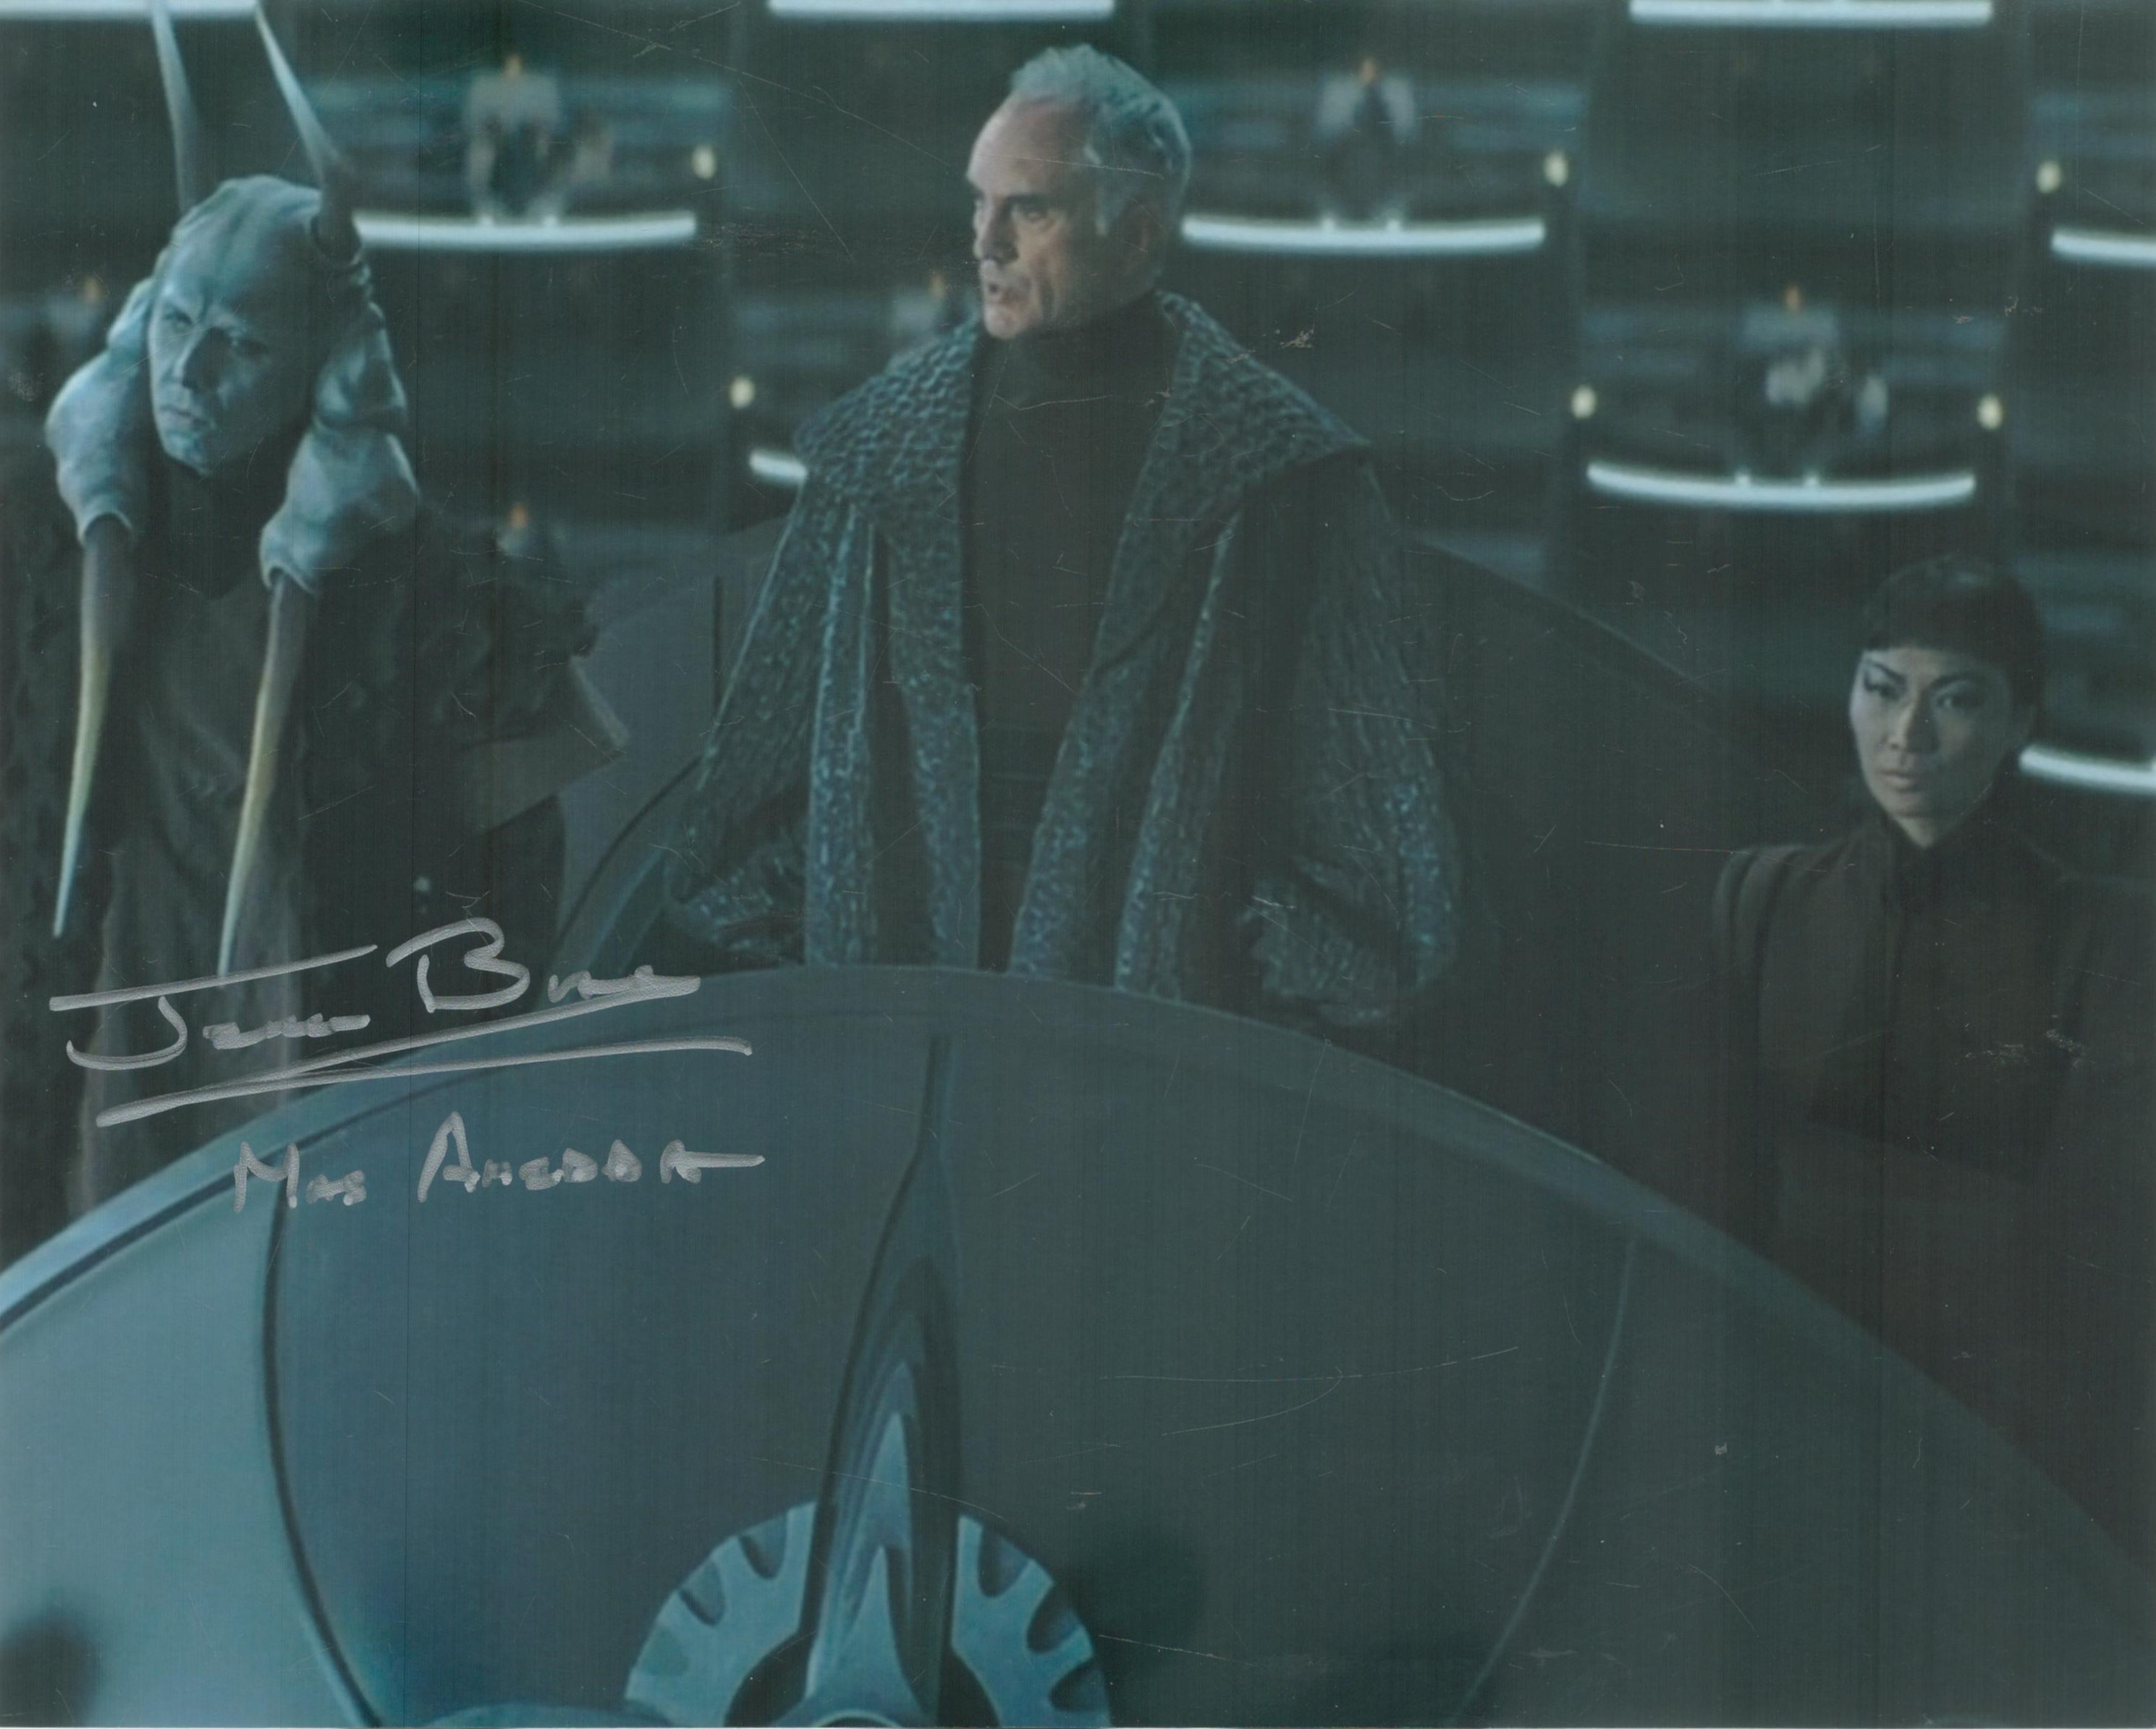 Star Wars collection four movie scene 8 x 10 inch colour photos signed by Gloria Garcia, C Andrew - Image 3 of 3